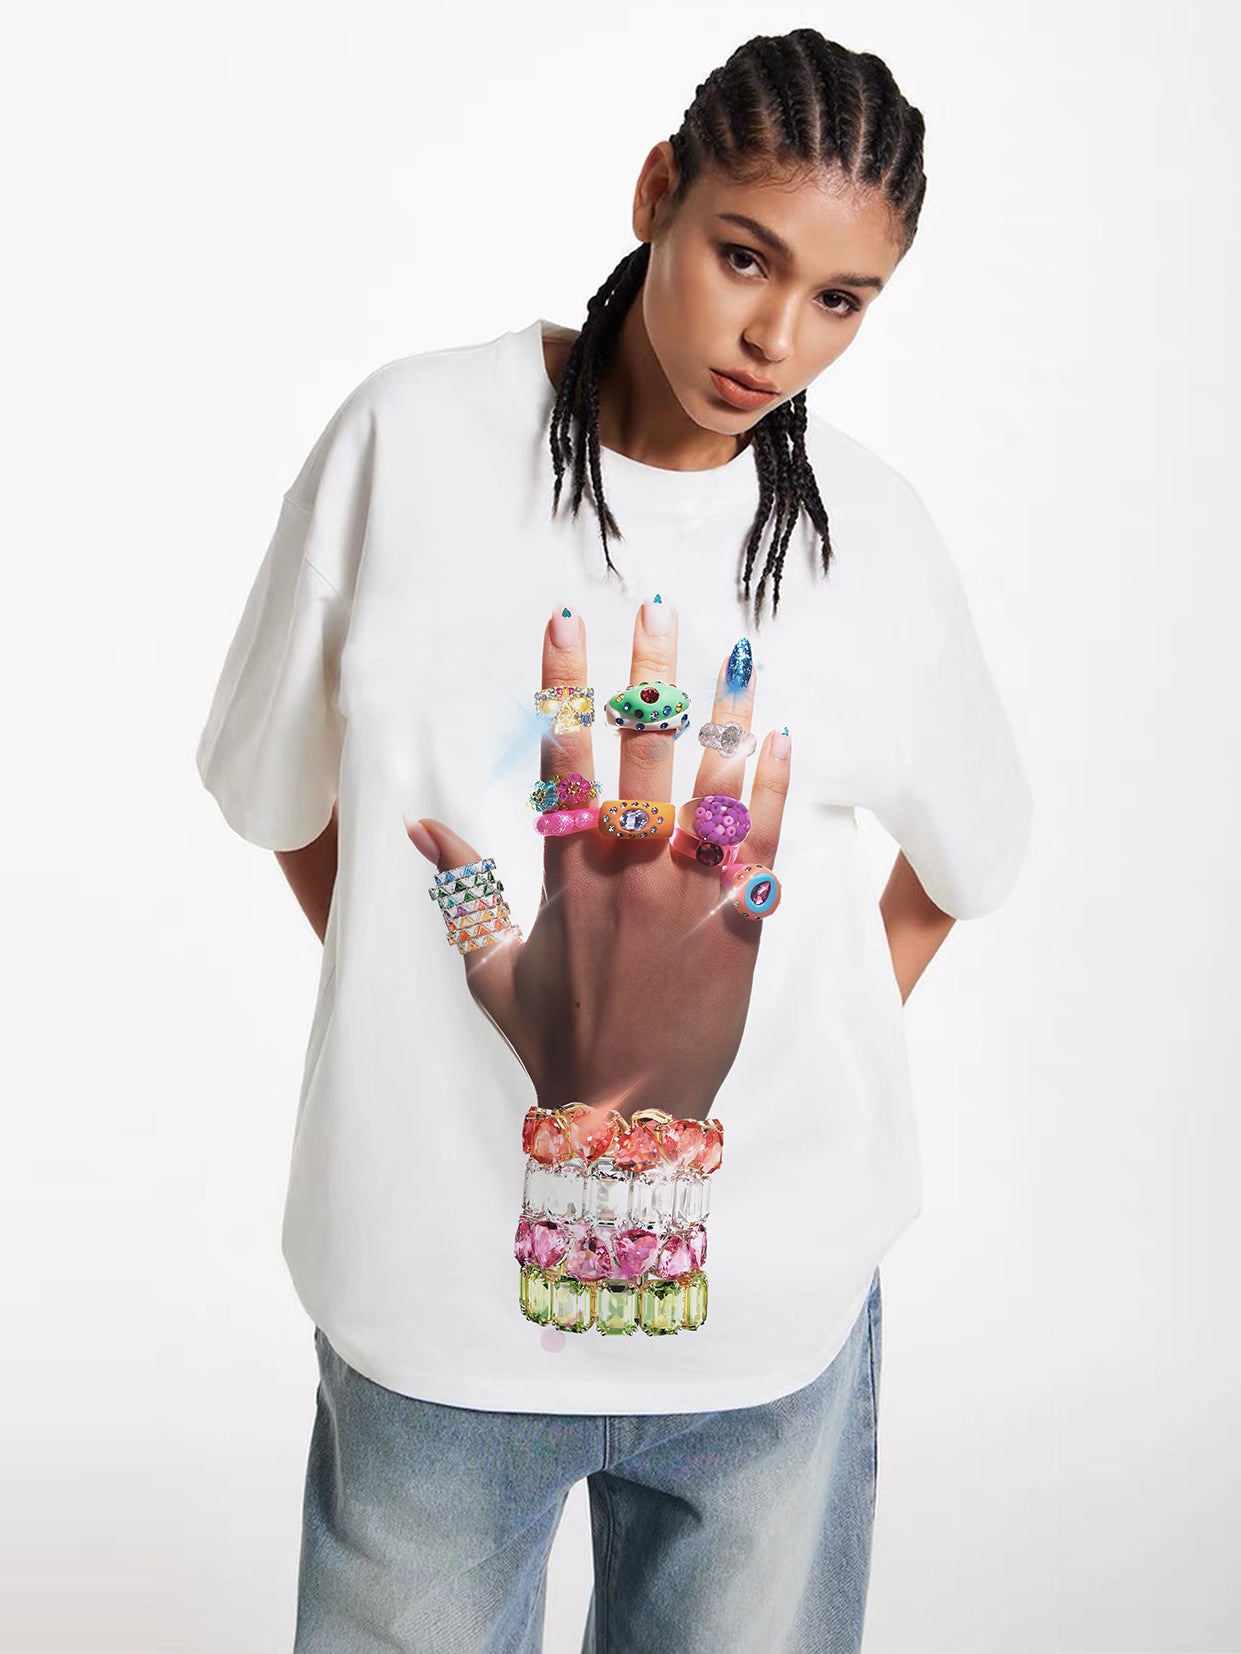 BOUNCE BACK© Colorful Art Bracelet and Ring T-shirt